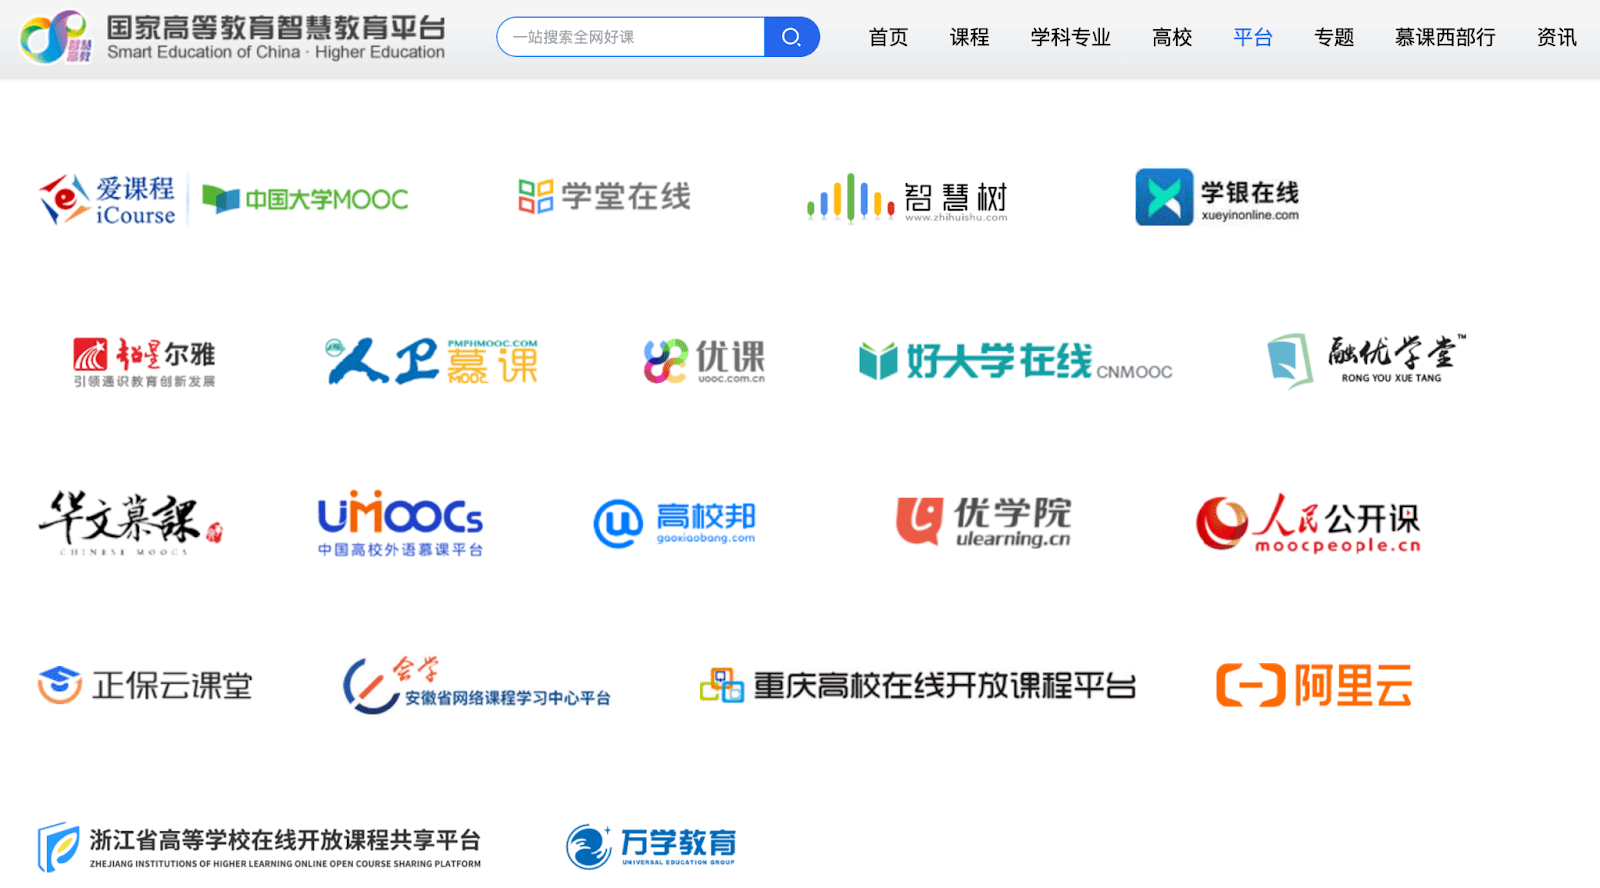 Massive List of Chinese Online Course Platforms in 2023 — Class Central